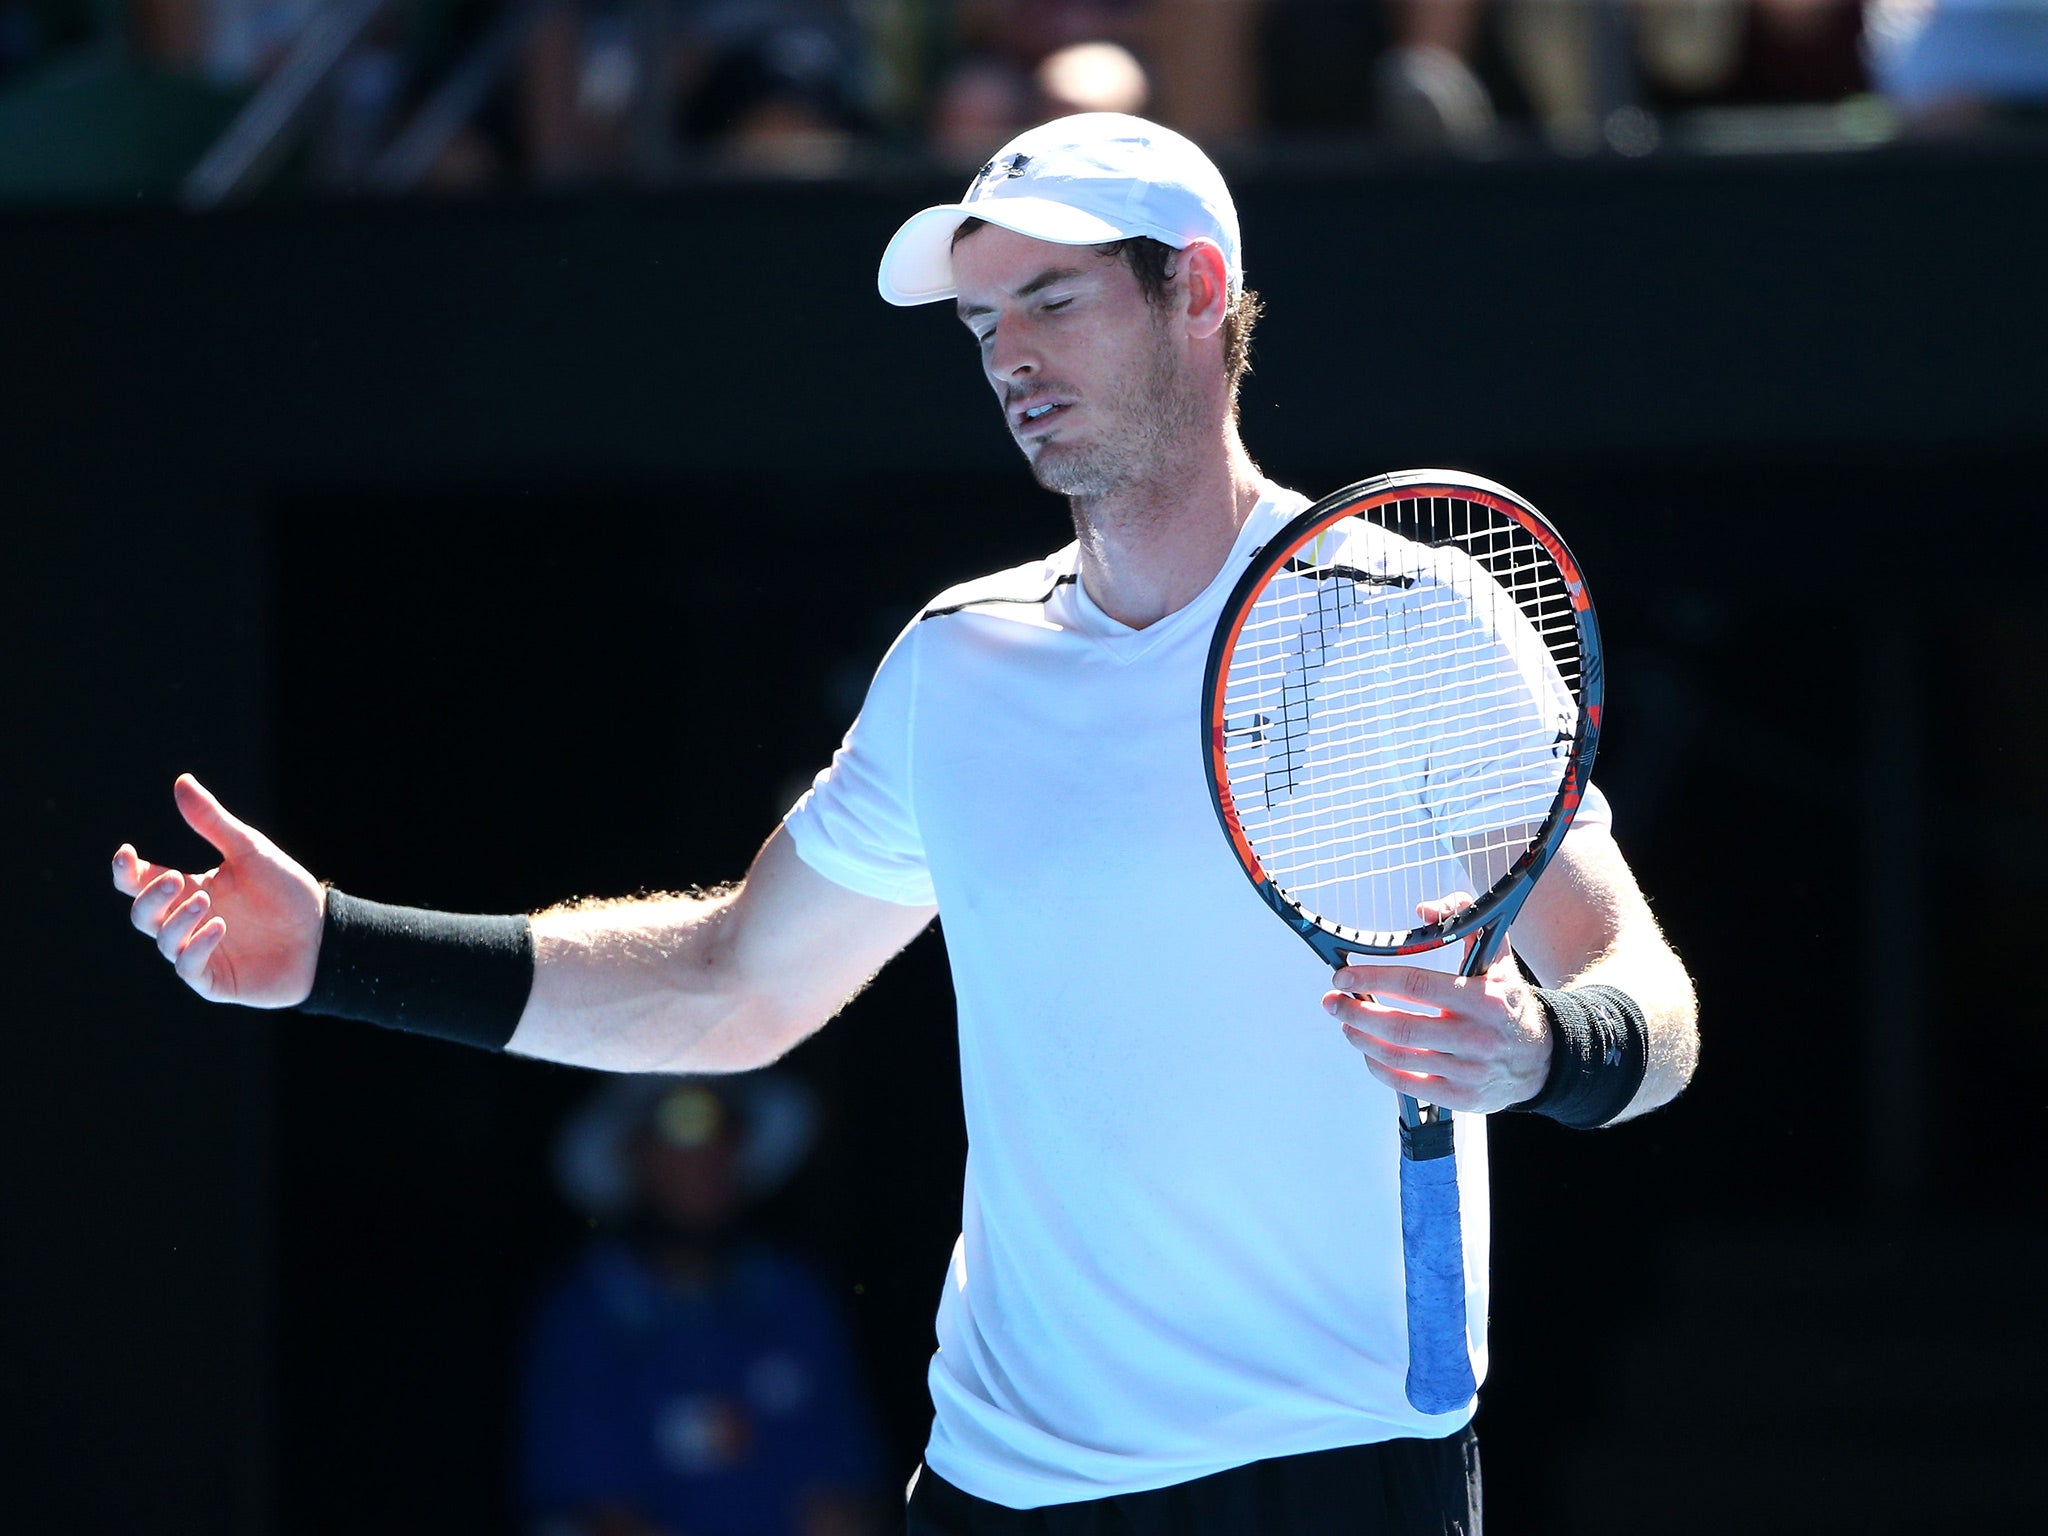 Murray crashes out of Australian Open in shock defeat to Zverev